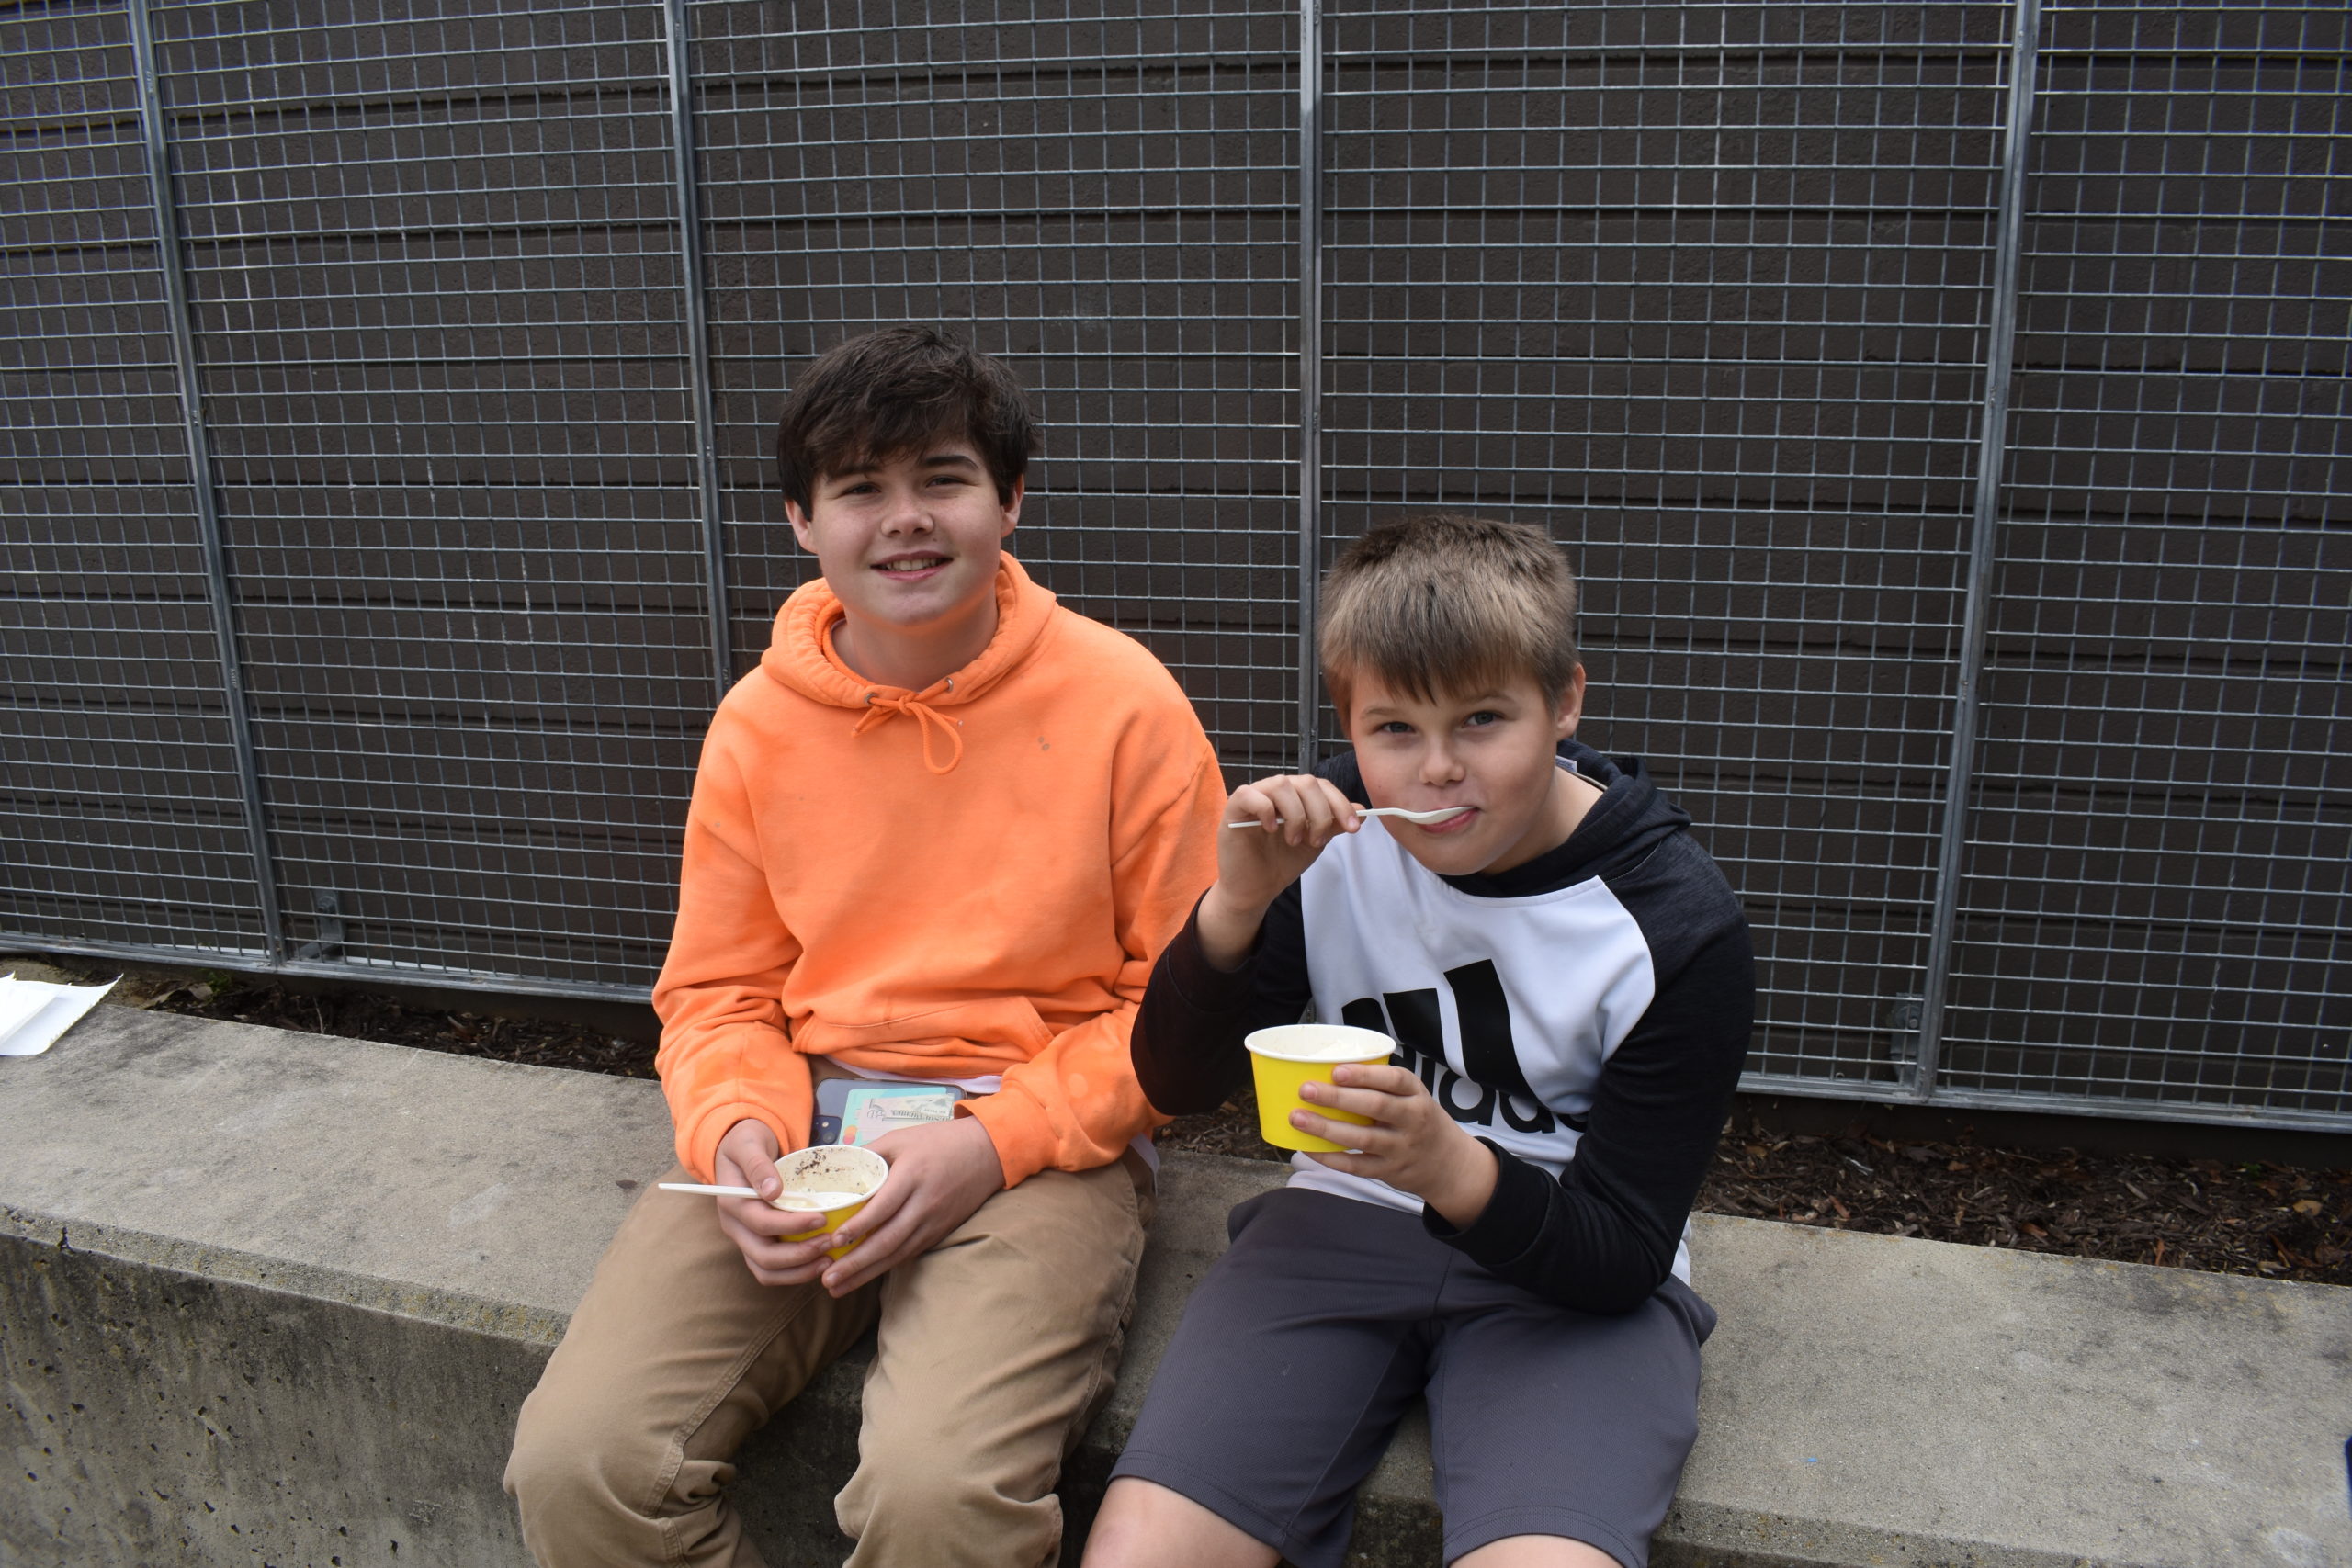 At Connors Heroes Art Session two boys are sitting outdoors eating ice cream